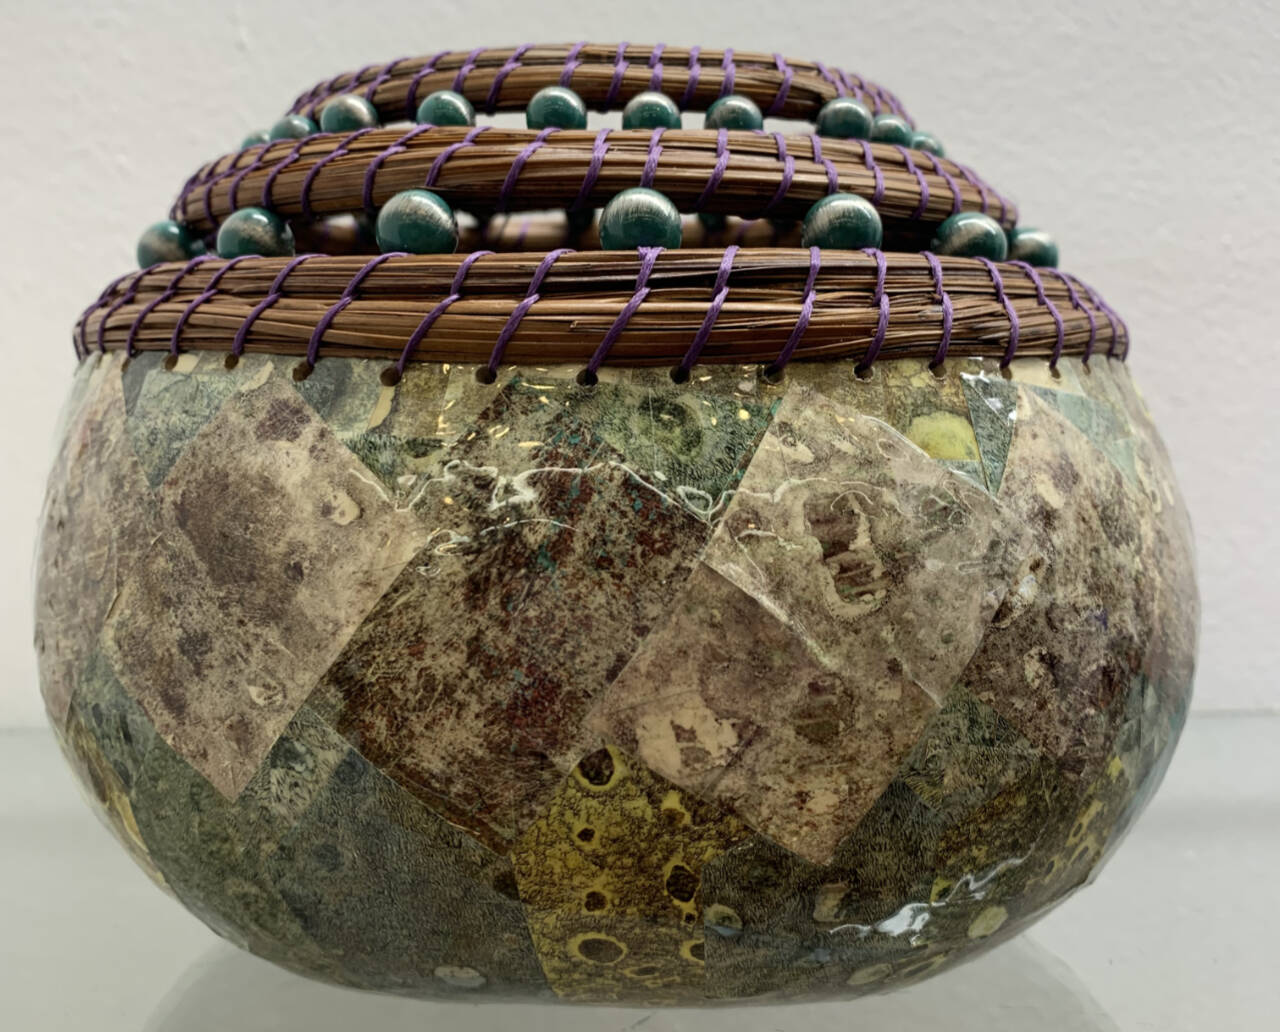 Photo courtesy of Blue Whole Gallery
Jane Smith, gourd and repurposed item artist, offers a free demonstration at Sequim”s Blue Whole Gallery on May 11.